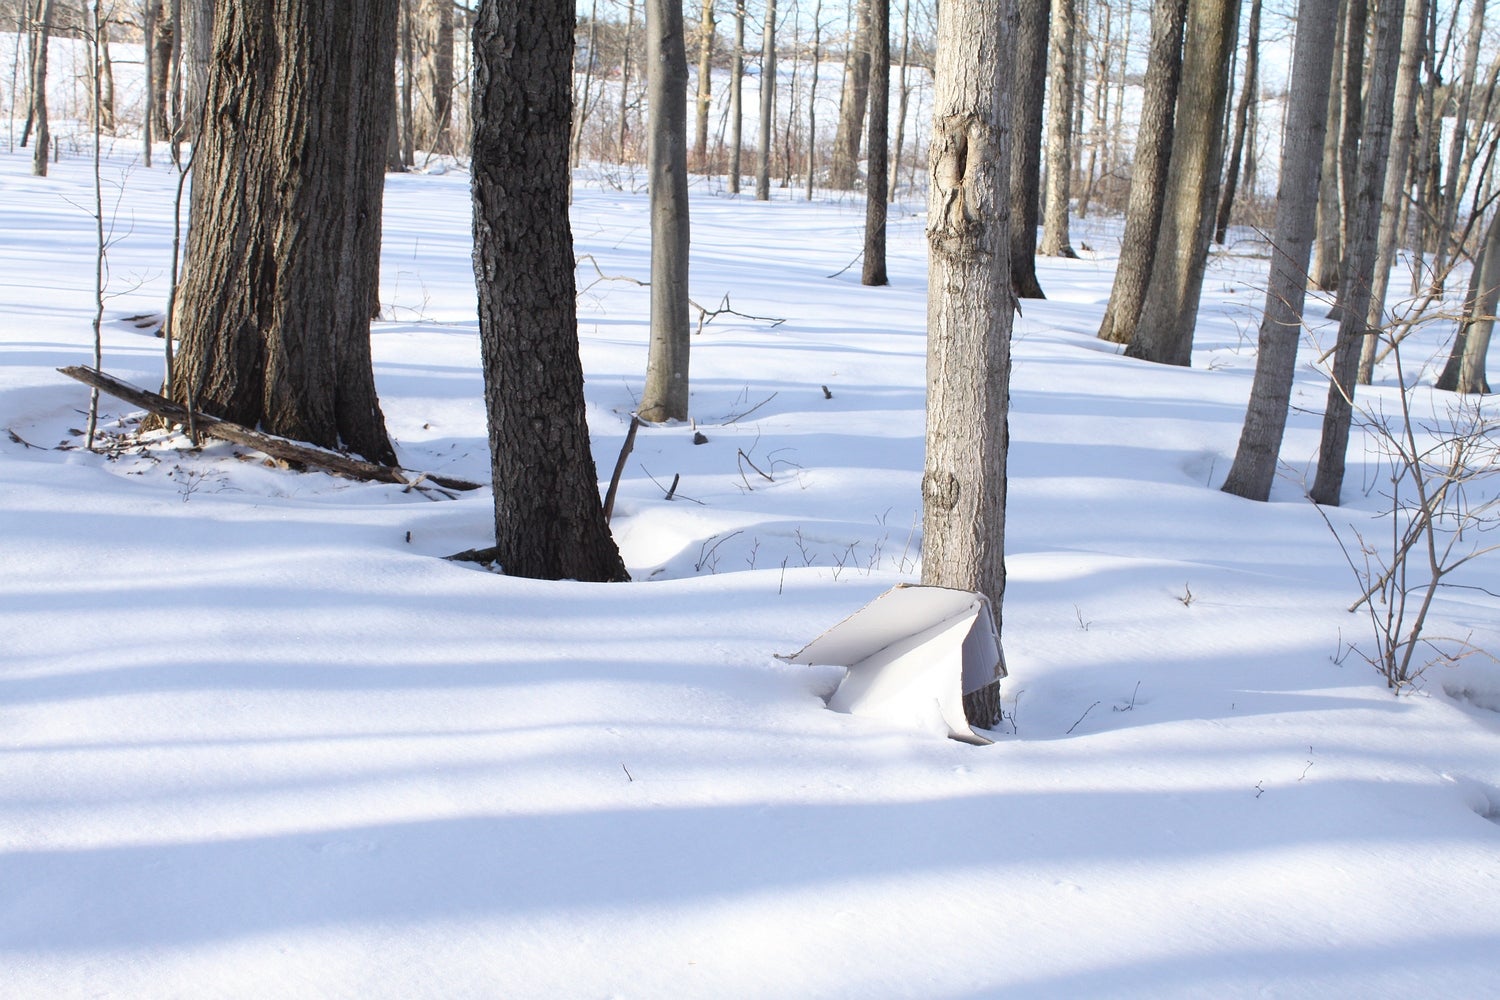 View among trees in the snow, of the trunks with a peice of white cardboard resting against one trunk.